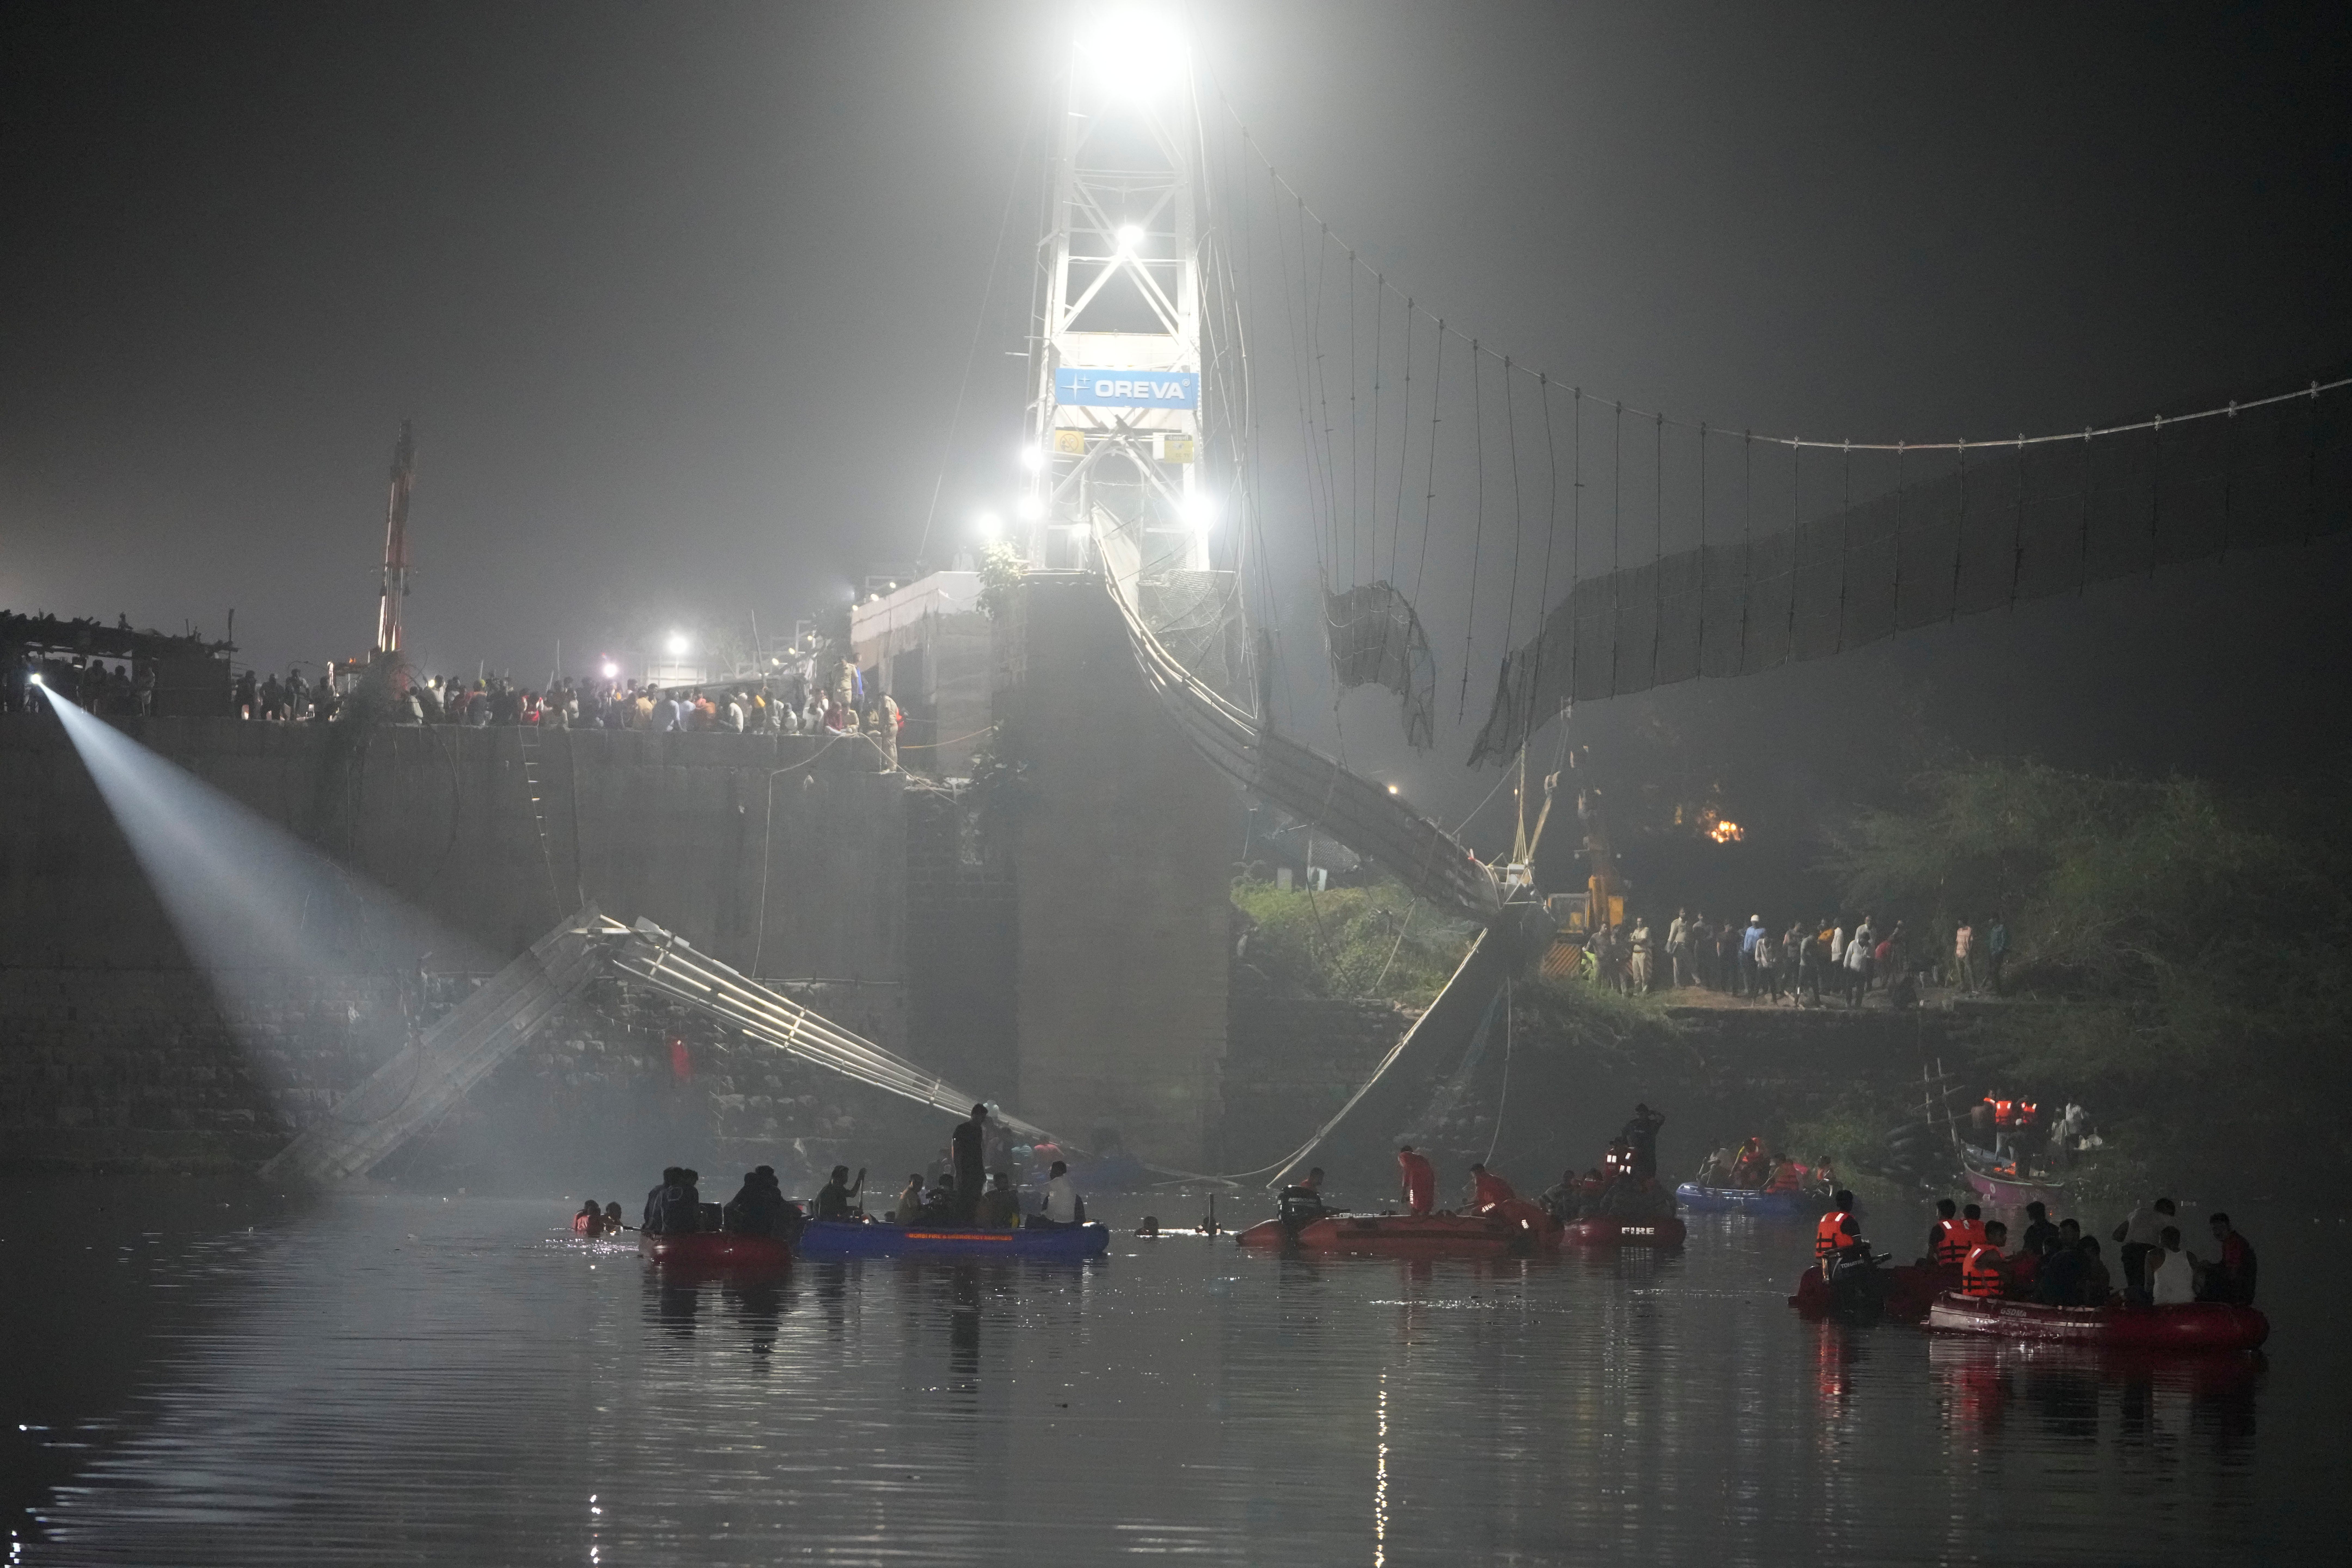 India bridge collapse kills at least 132, including mostly teens, women and older people: officials